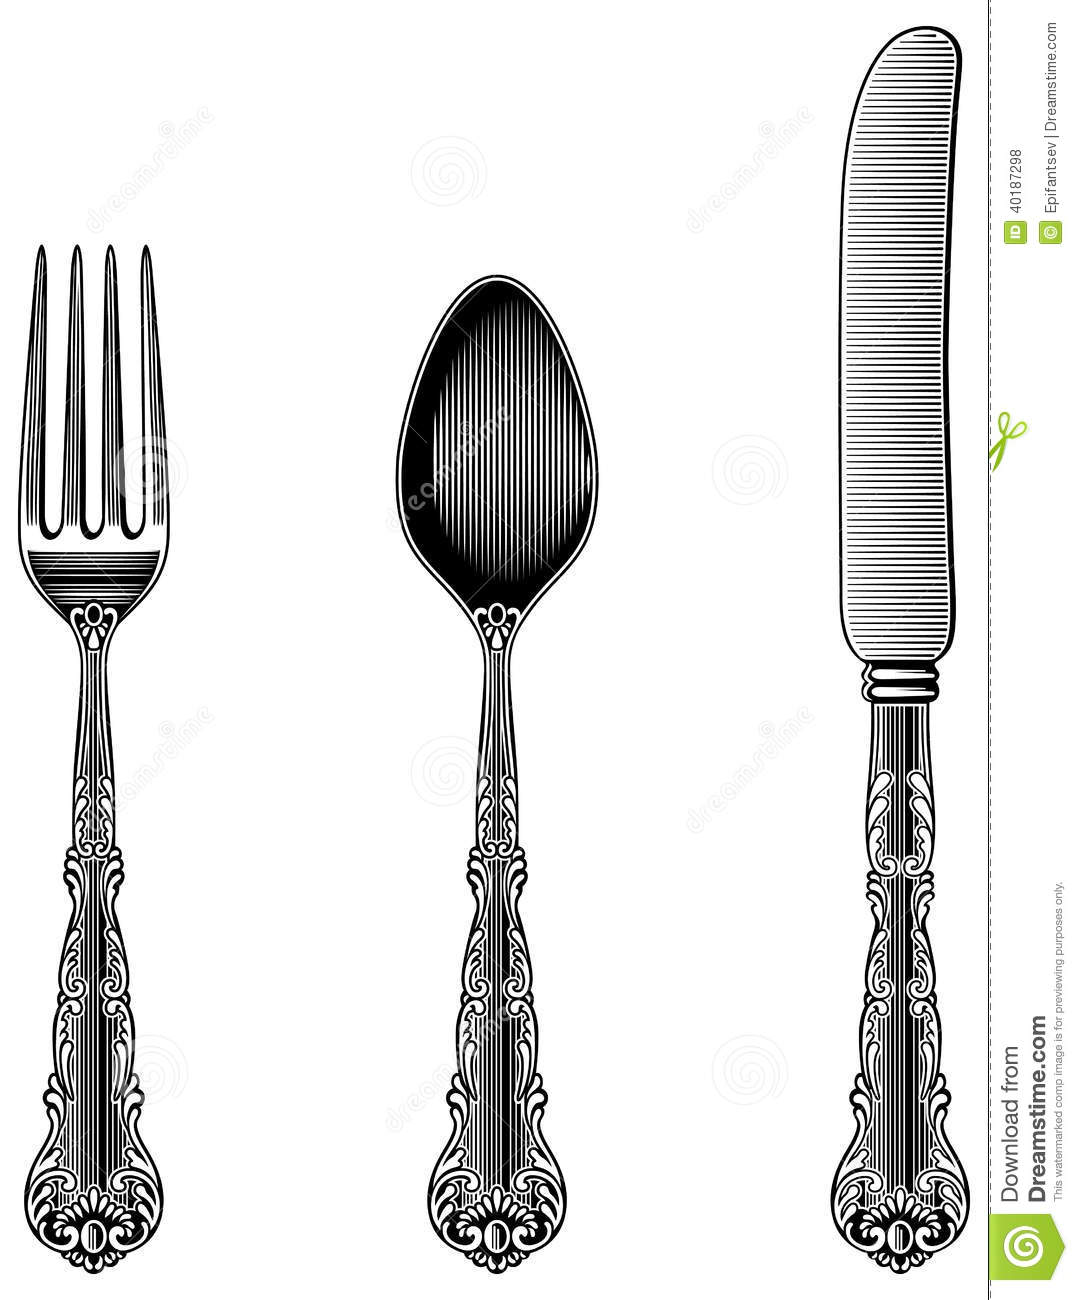 Spoon Fork And Knife In Vintage Style From The Victorian Period    